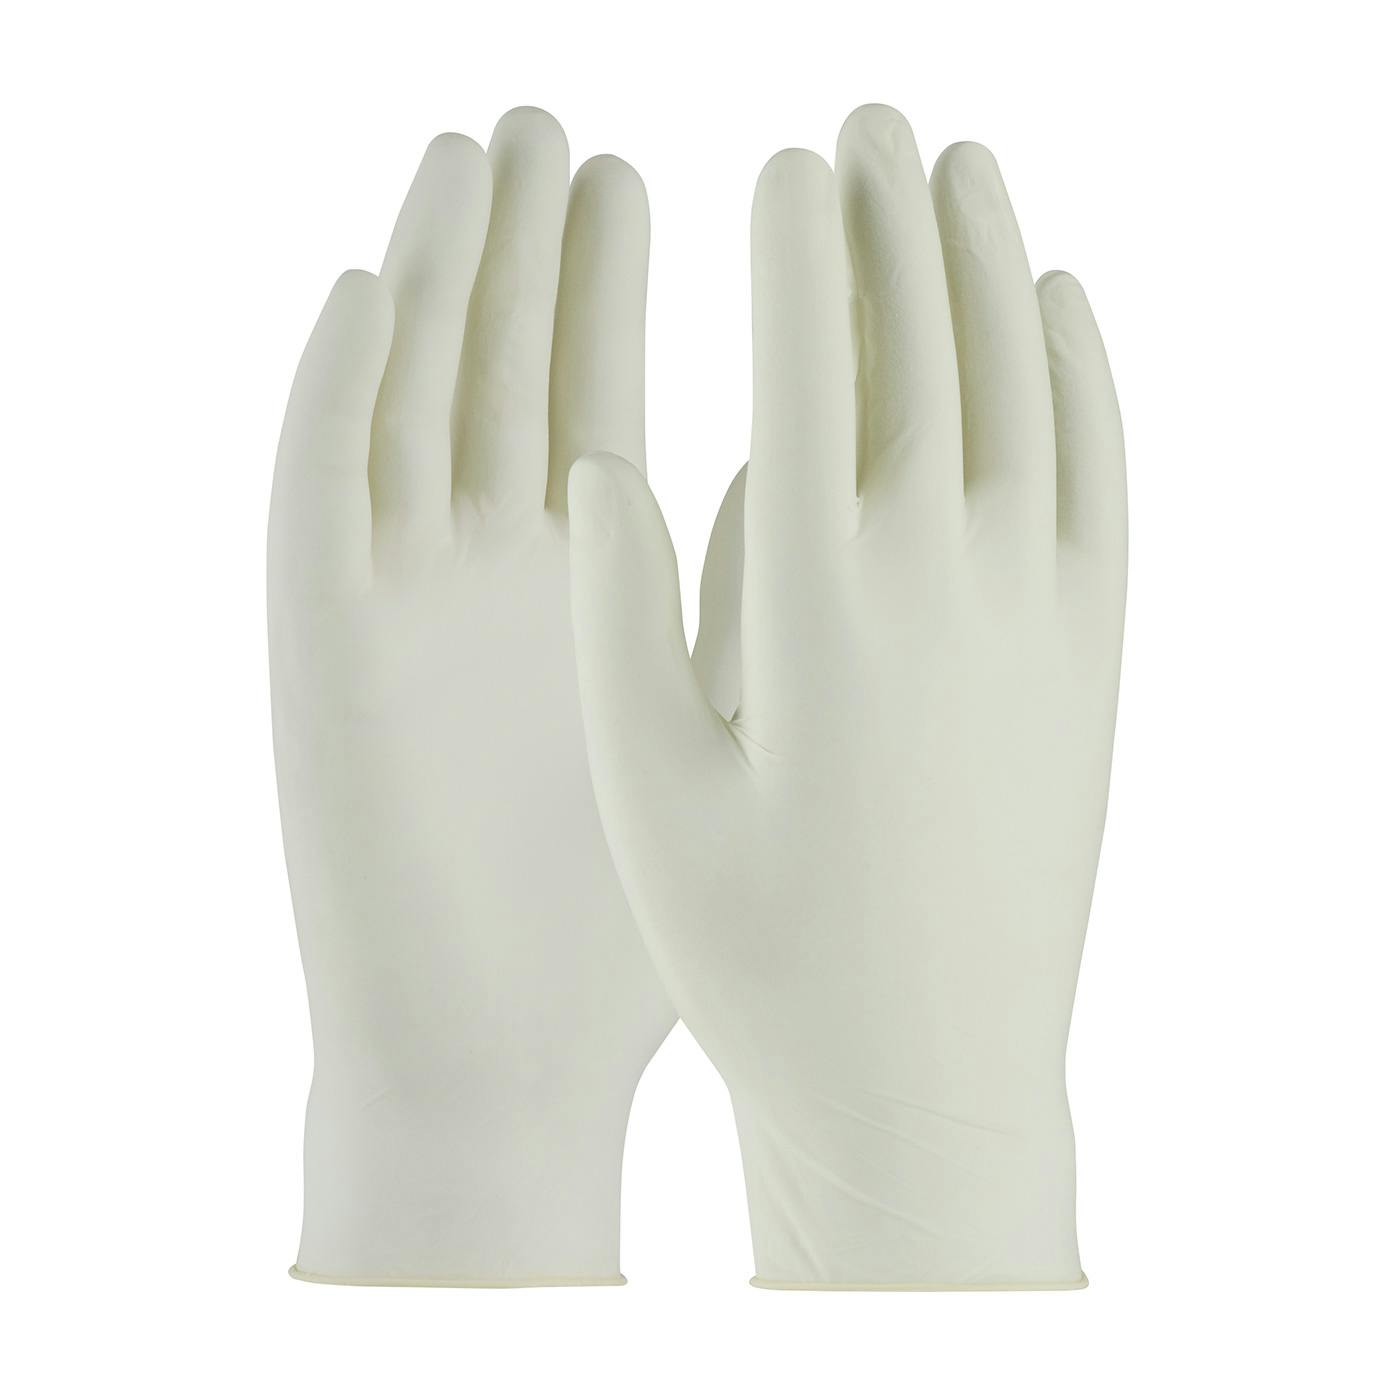 Ambi-dex® Repel Disposable Latex Glove, Powder Free with Textured Grip - 5 mil (62-322PF)_1